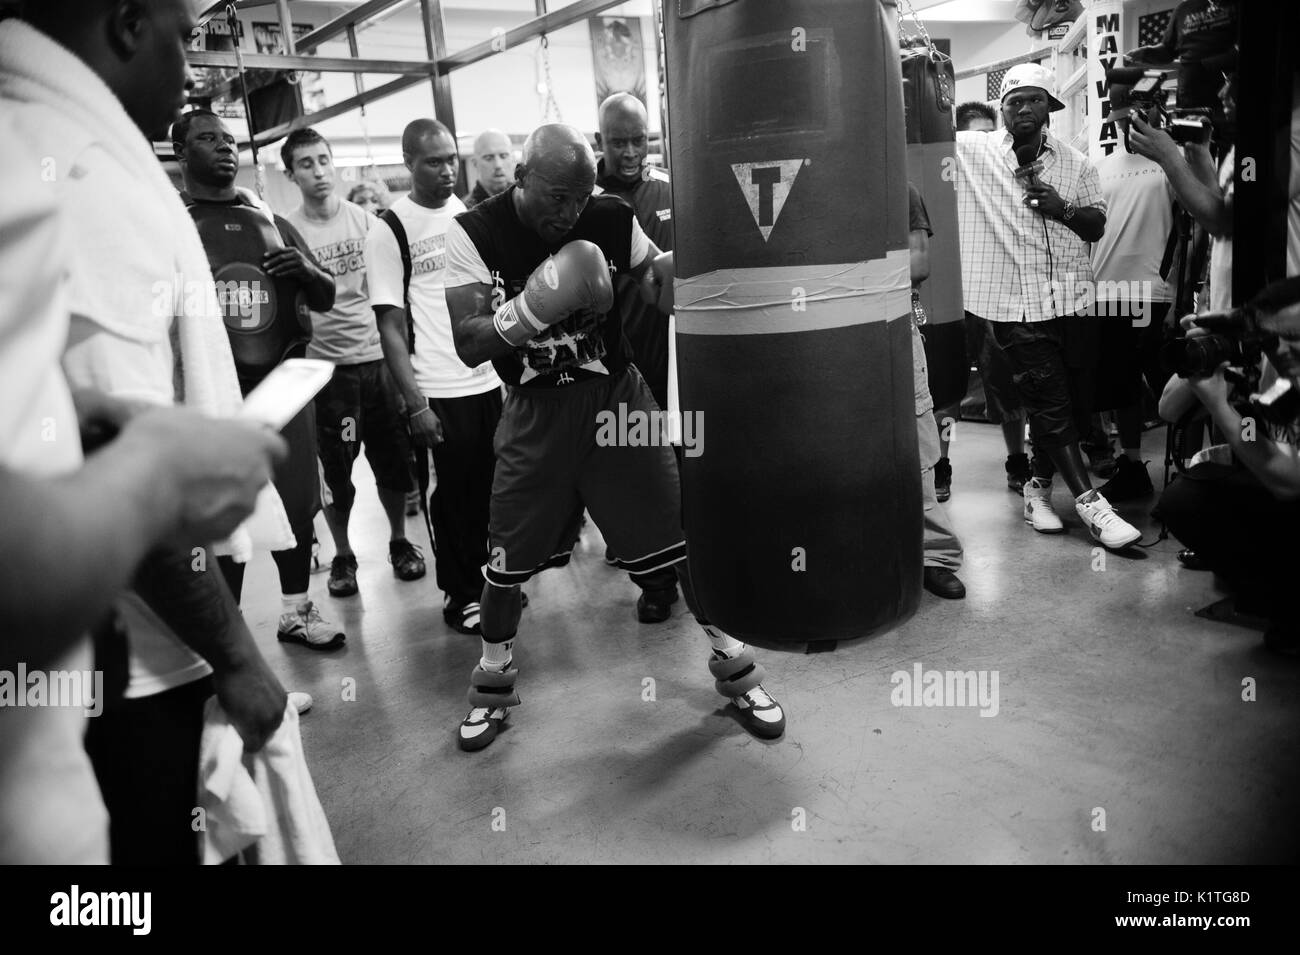 Boxer Floyd Mayweather Jr. Trains front media Mayweather Boxing Gym avril 24,2012 Las Vegas, Nevada. Banque D'Images